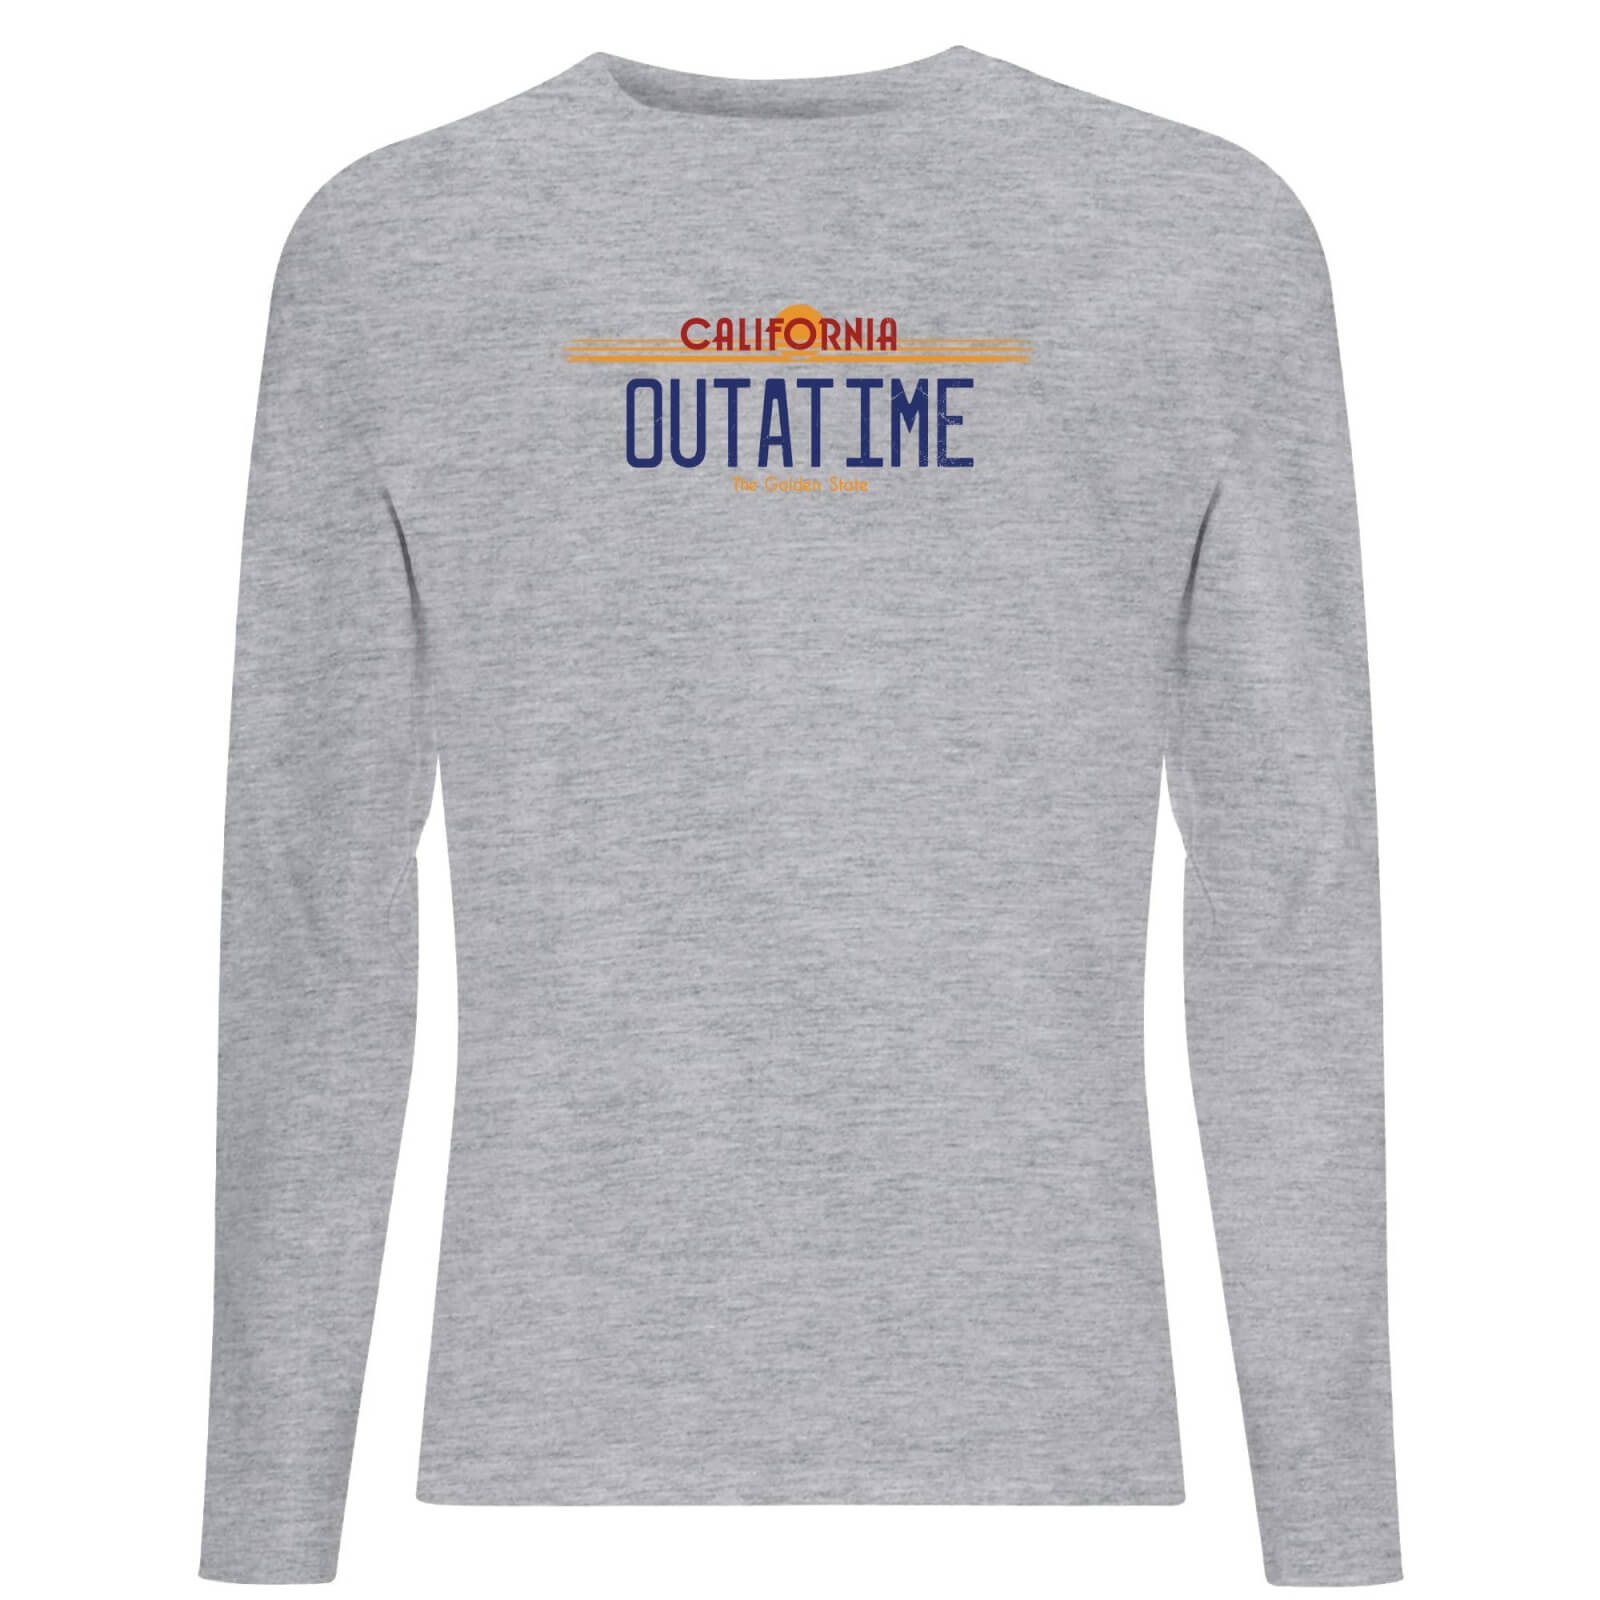 Image of Back To The Future Outatime Plate Unisex Long Sleeve T-Shirt - Grey - M - Grau